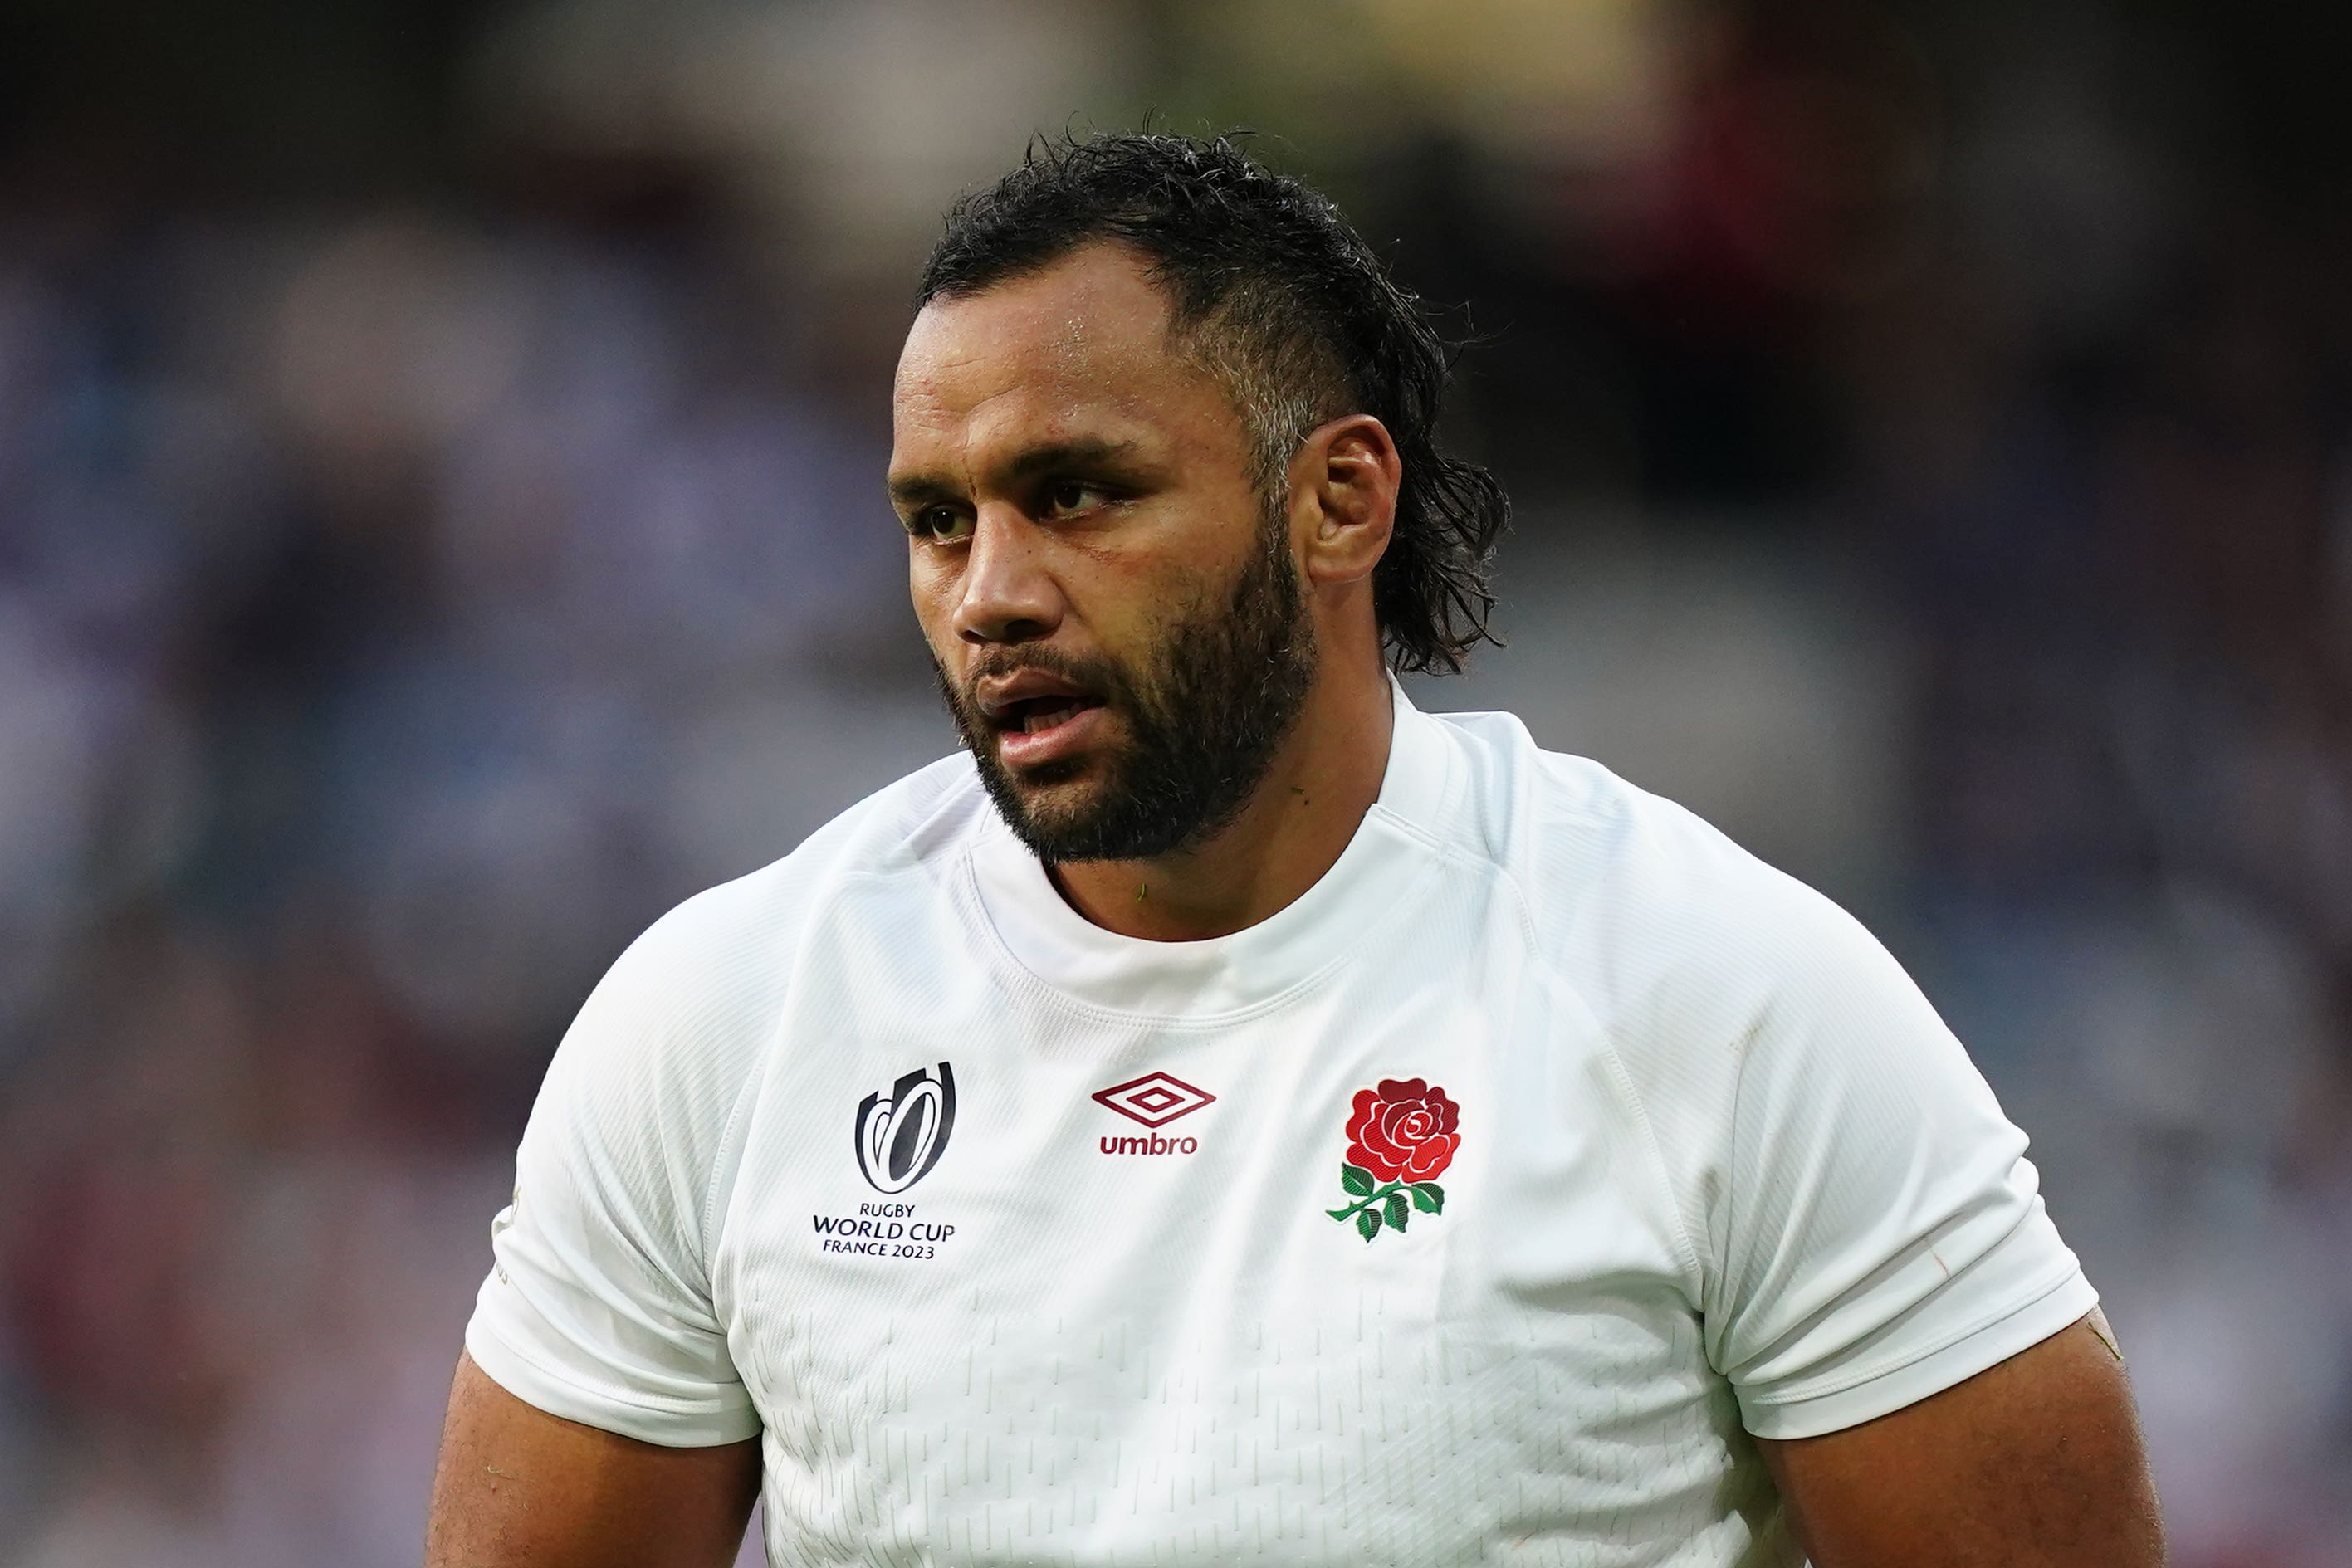 Billy Vunipola was arrested in Spain after an incident in a bar